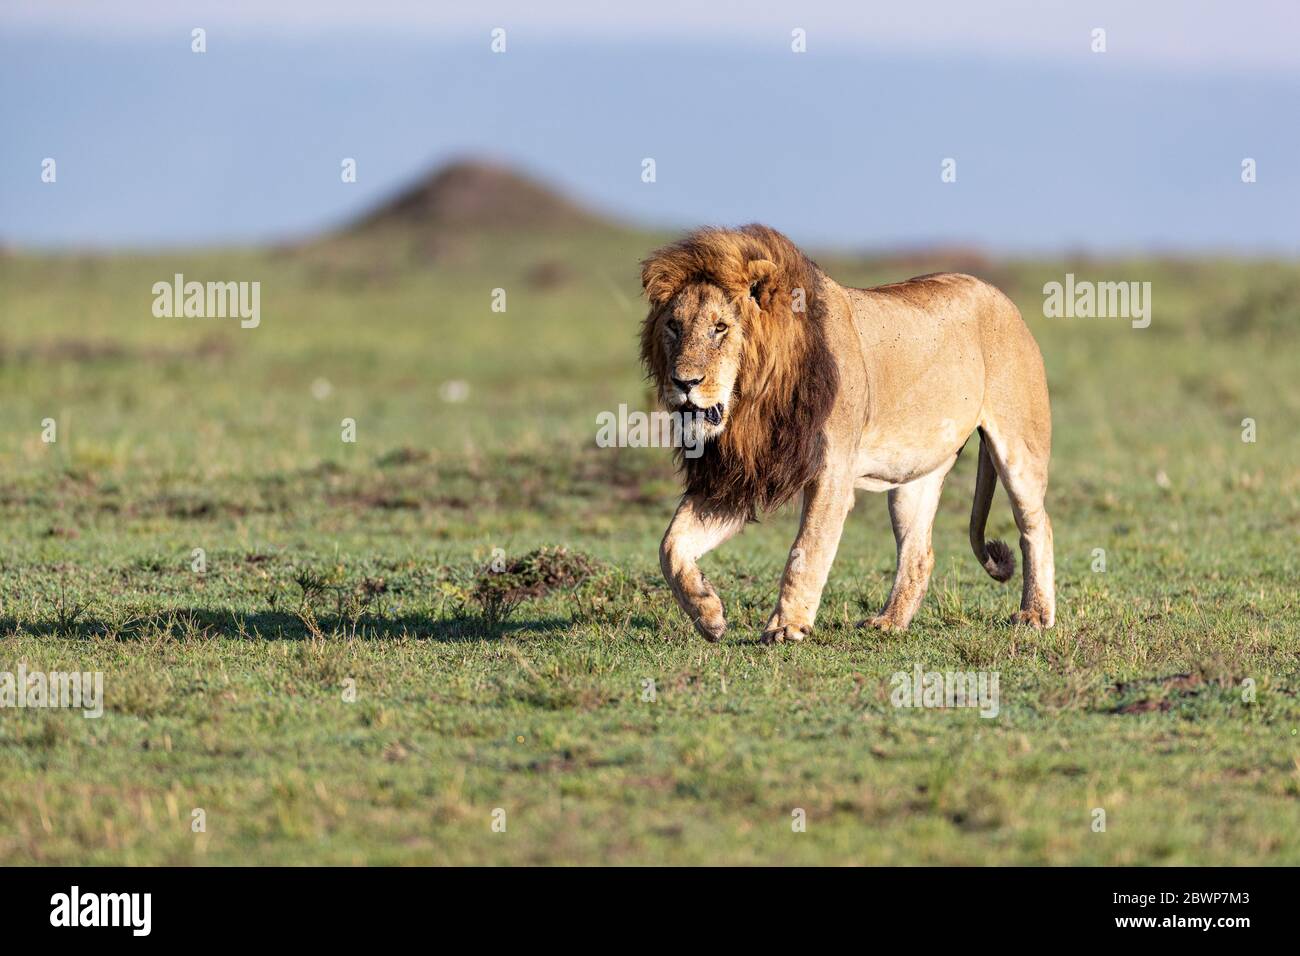 Large African male lion with big mane walking forward in an open grass field in Kenya, Africa Stock Photo